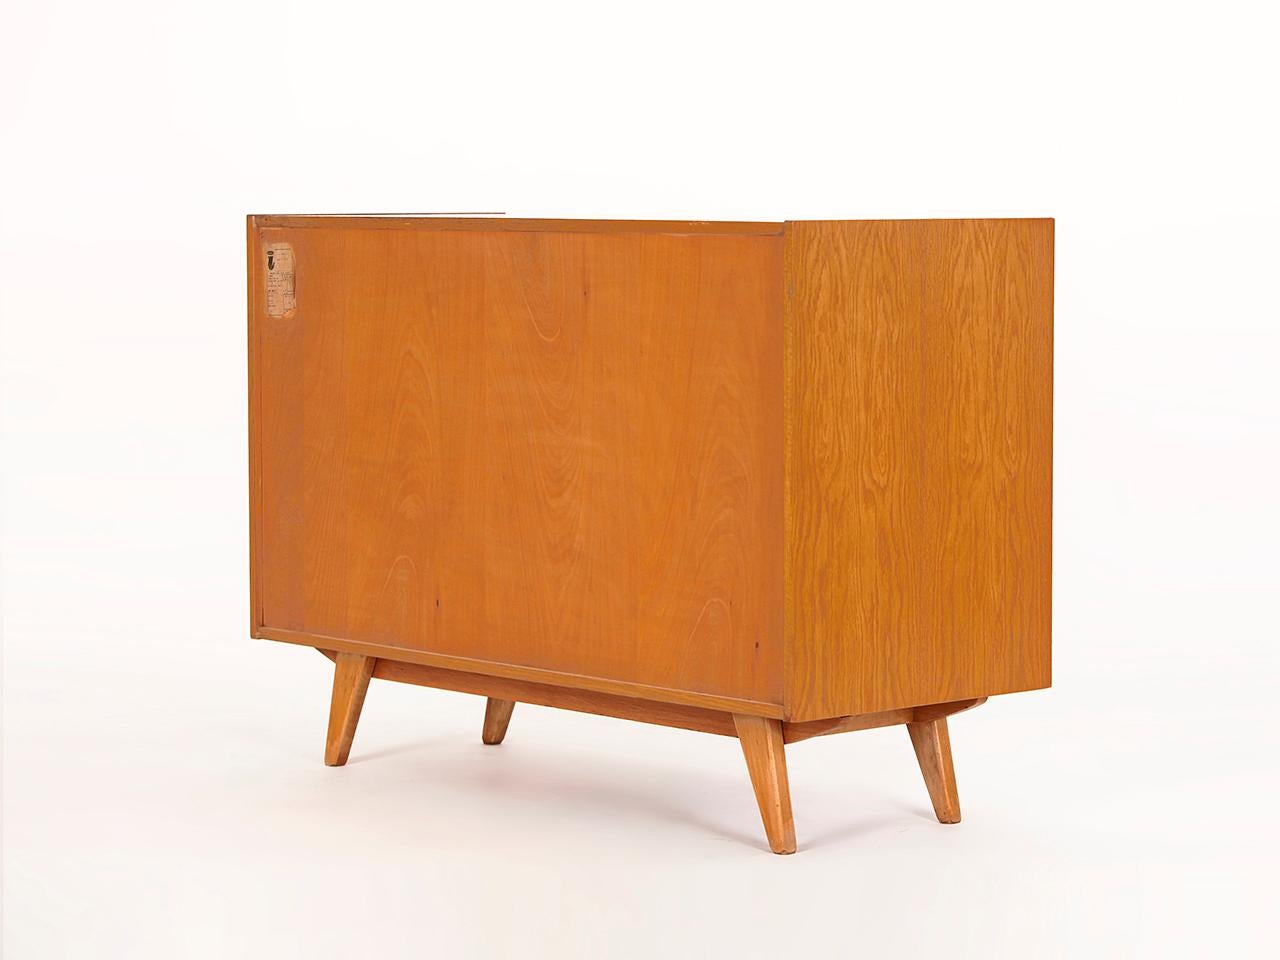 Midcentury sideboard by Jiri Jiroutek for Interier Praha, dating from the 1960s, with five drawers and gray doors, from the former Czechoslovakia. Completely restored.